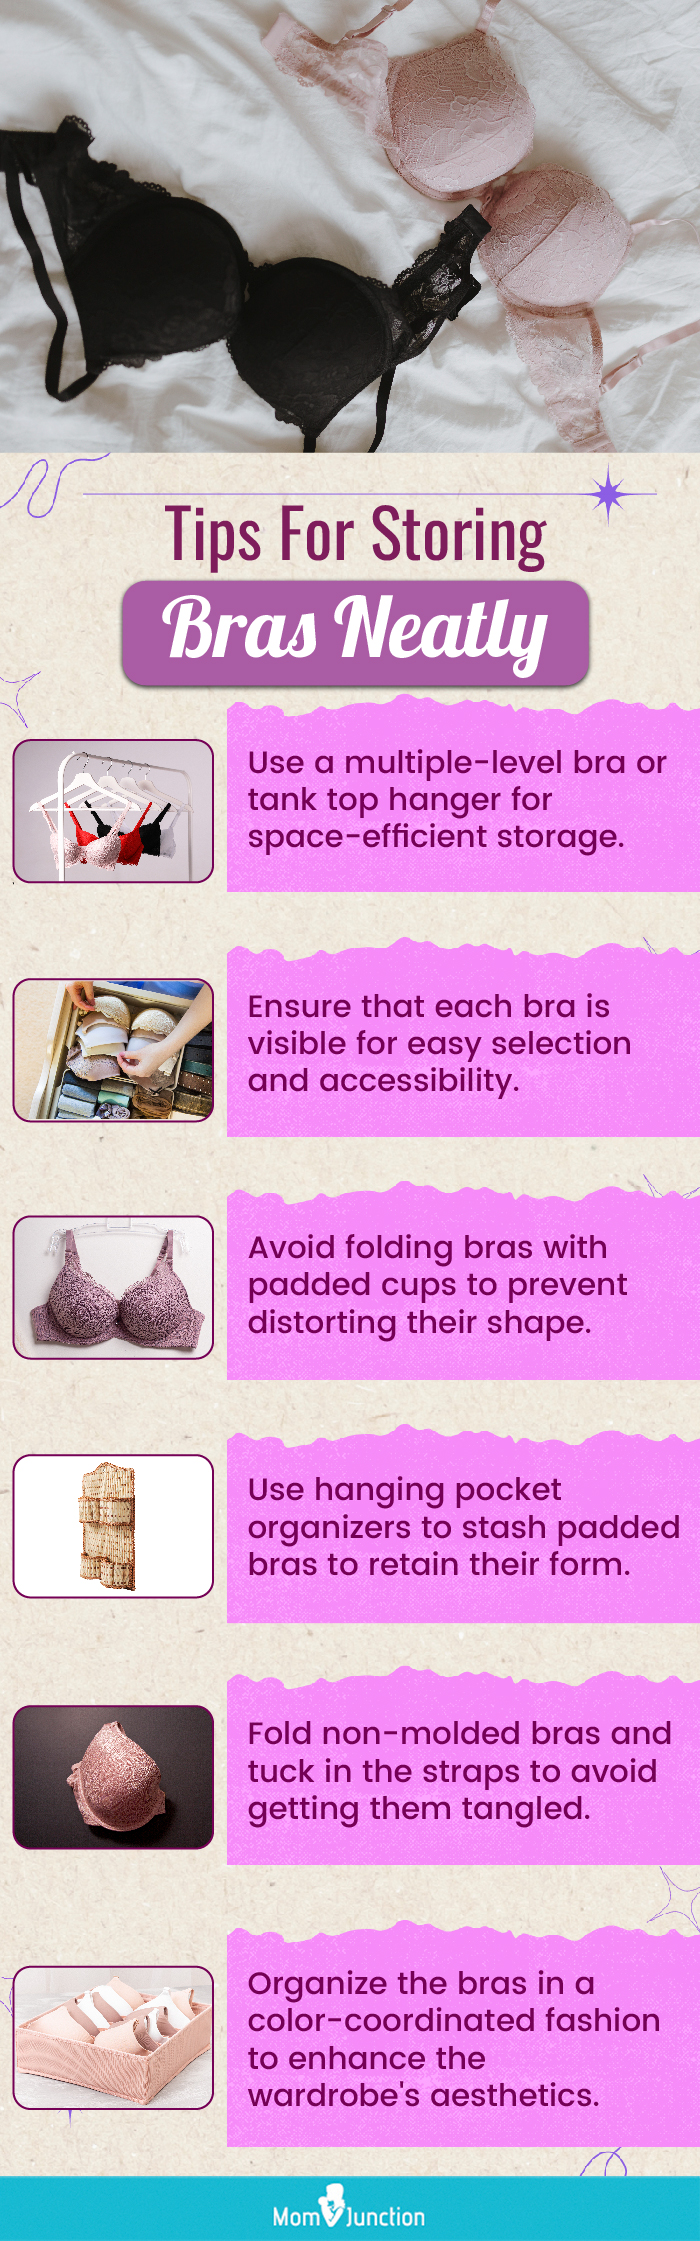  Tips For Storing Bras Neatly (infographic)